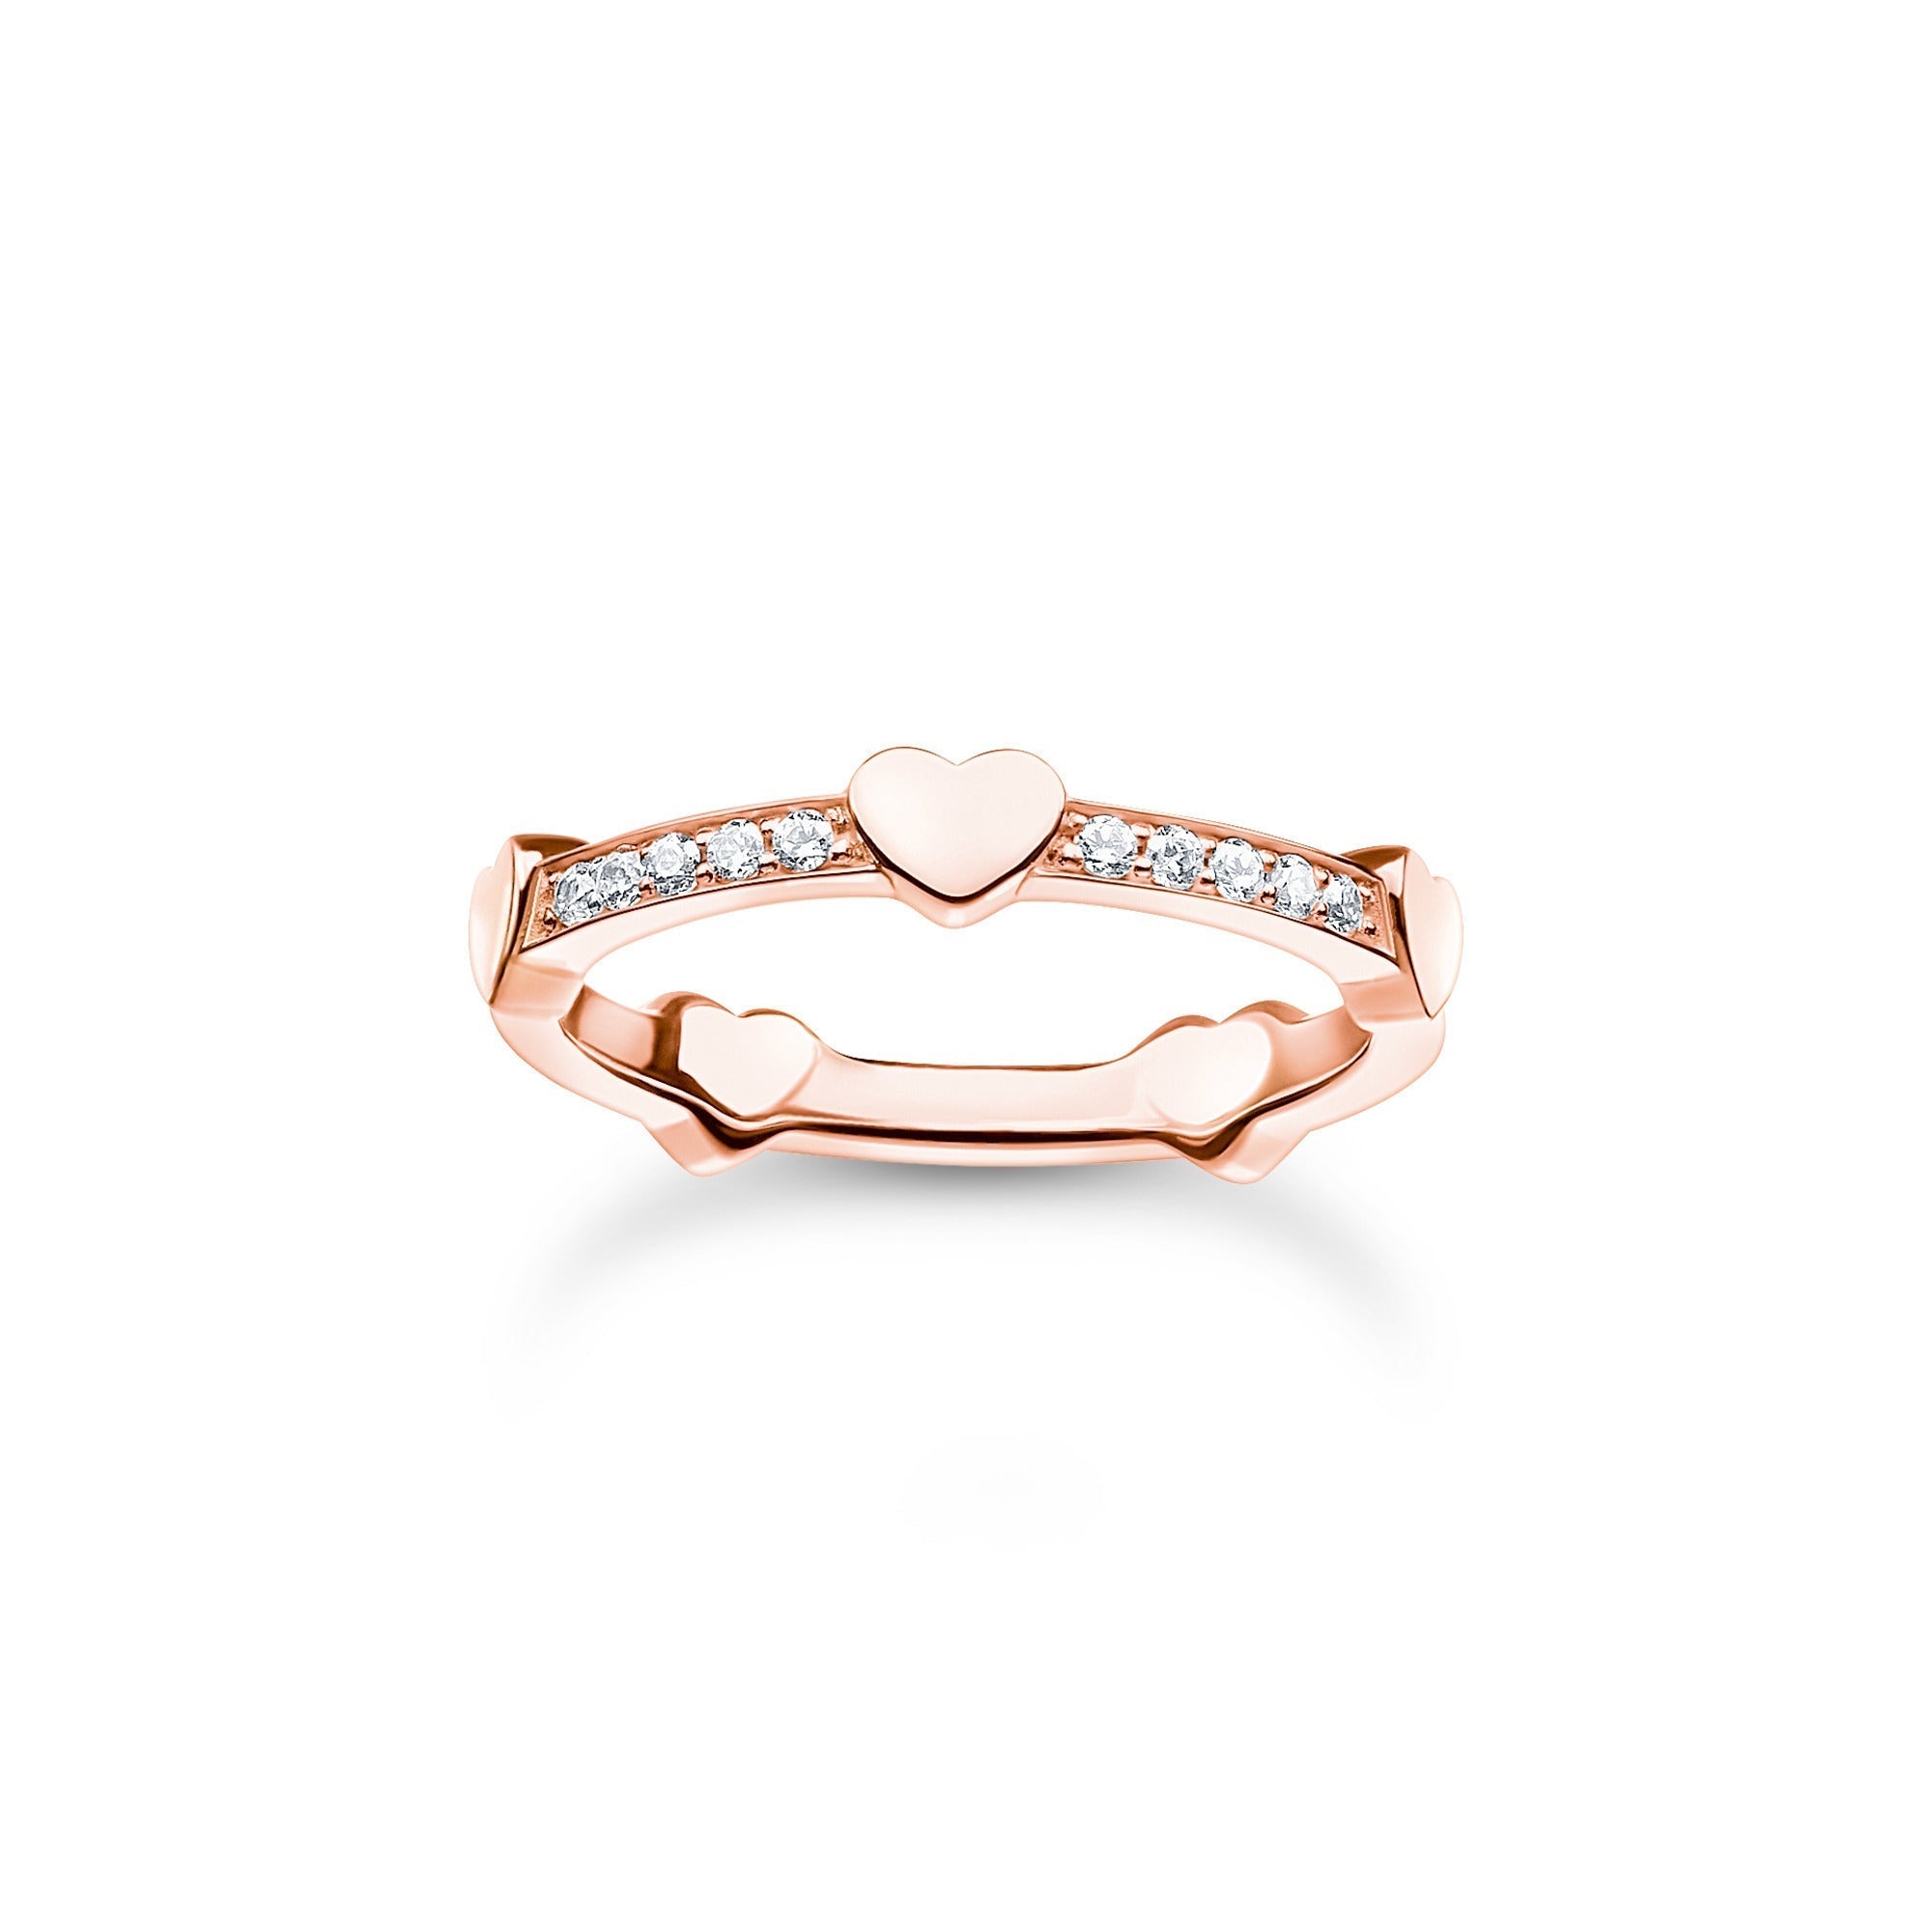 Thomas Sabo Charm Club Rose Gold Plated Sterling Silver Hearts Ring